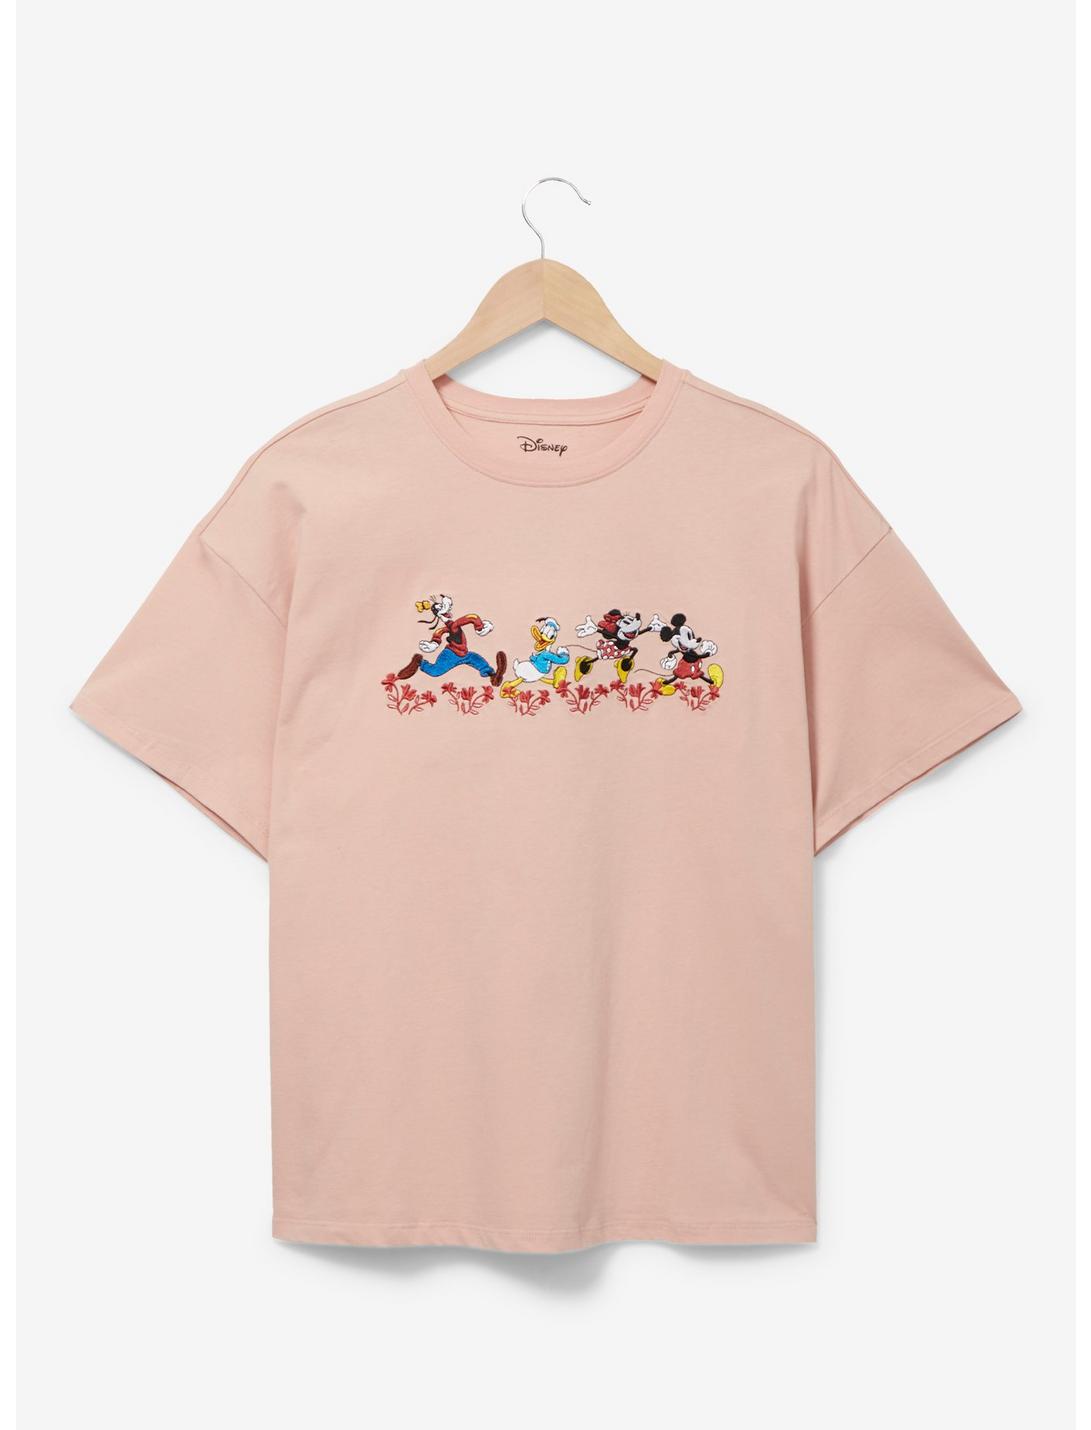 Disney Mickey Mouse & Friends Floral Women's T-Shirt - BoxLunch Exclusive, LIGHT PINK, hi-res